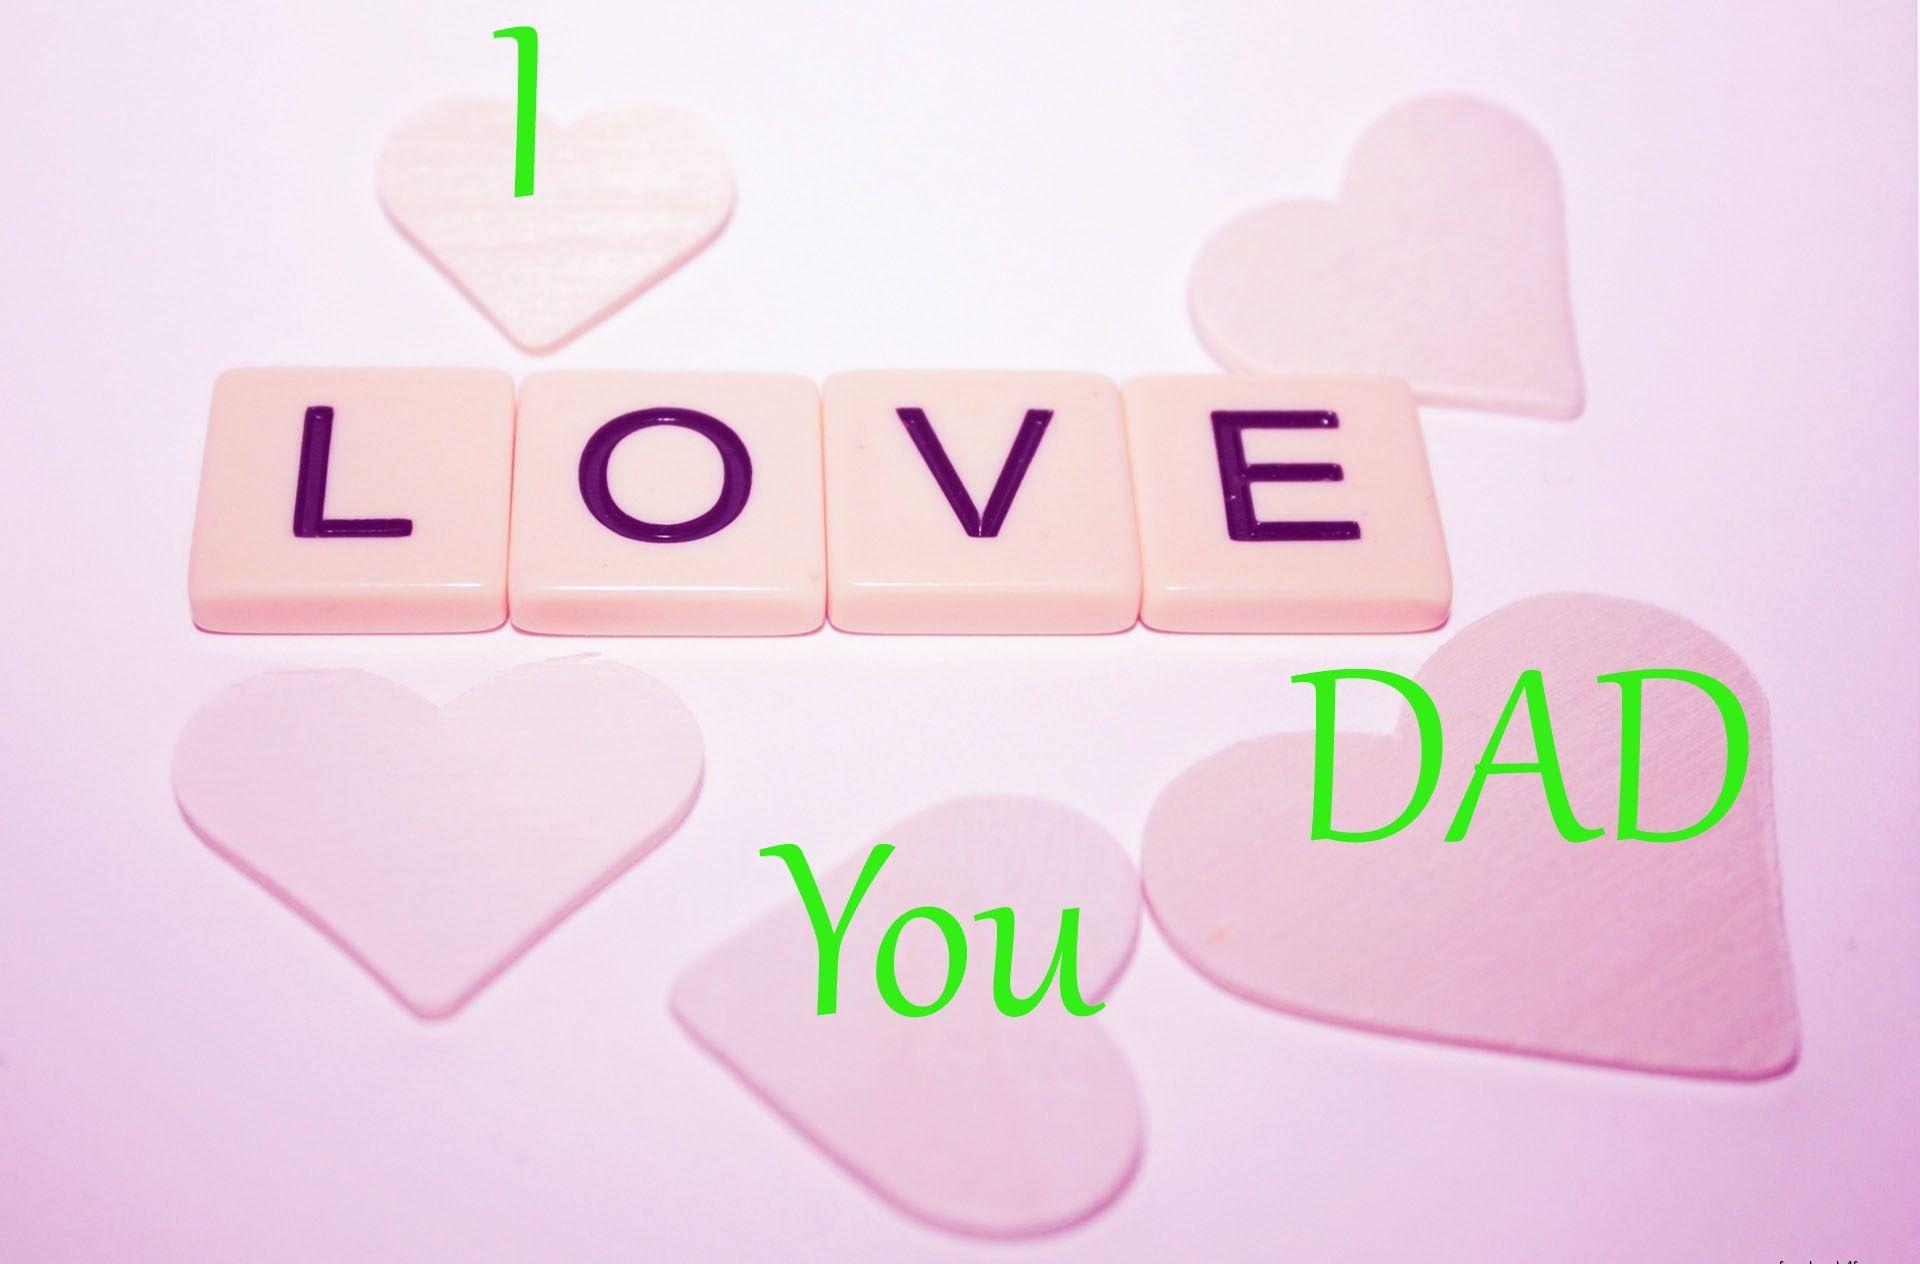 Mom And Dad Wallpapers - Wallpaper Cave I Love You Mom And Dad Wallpape...